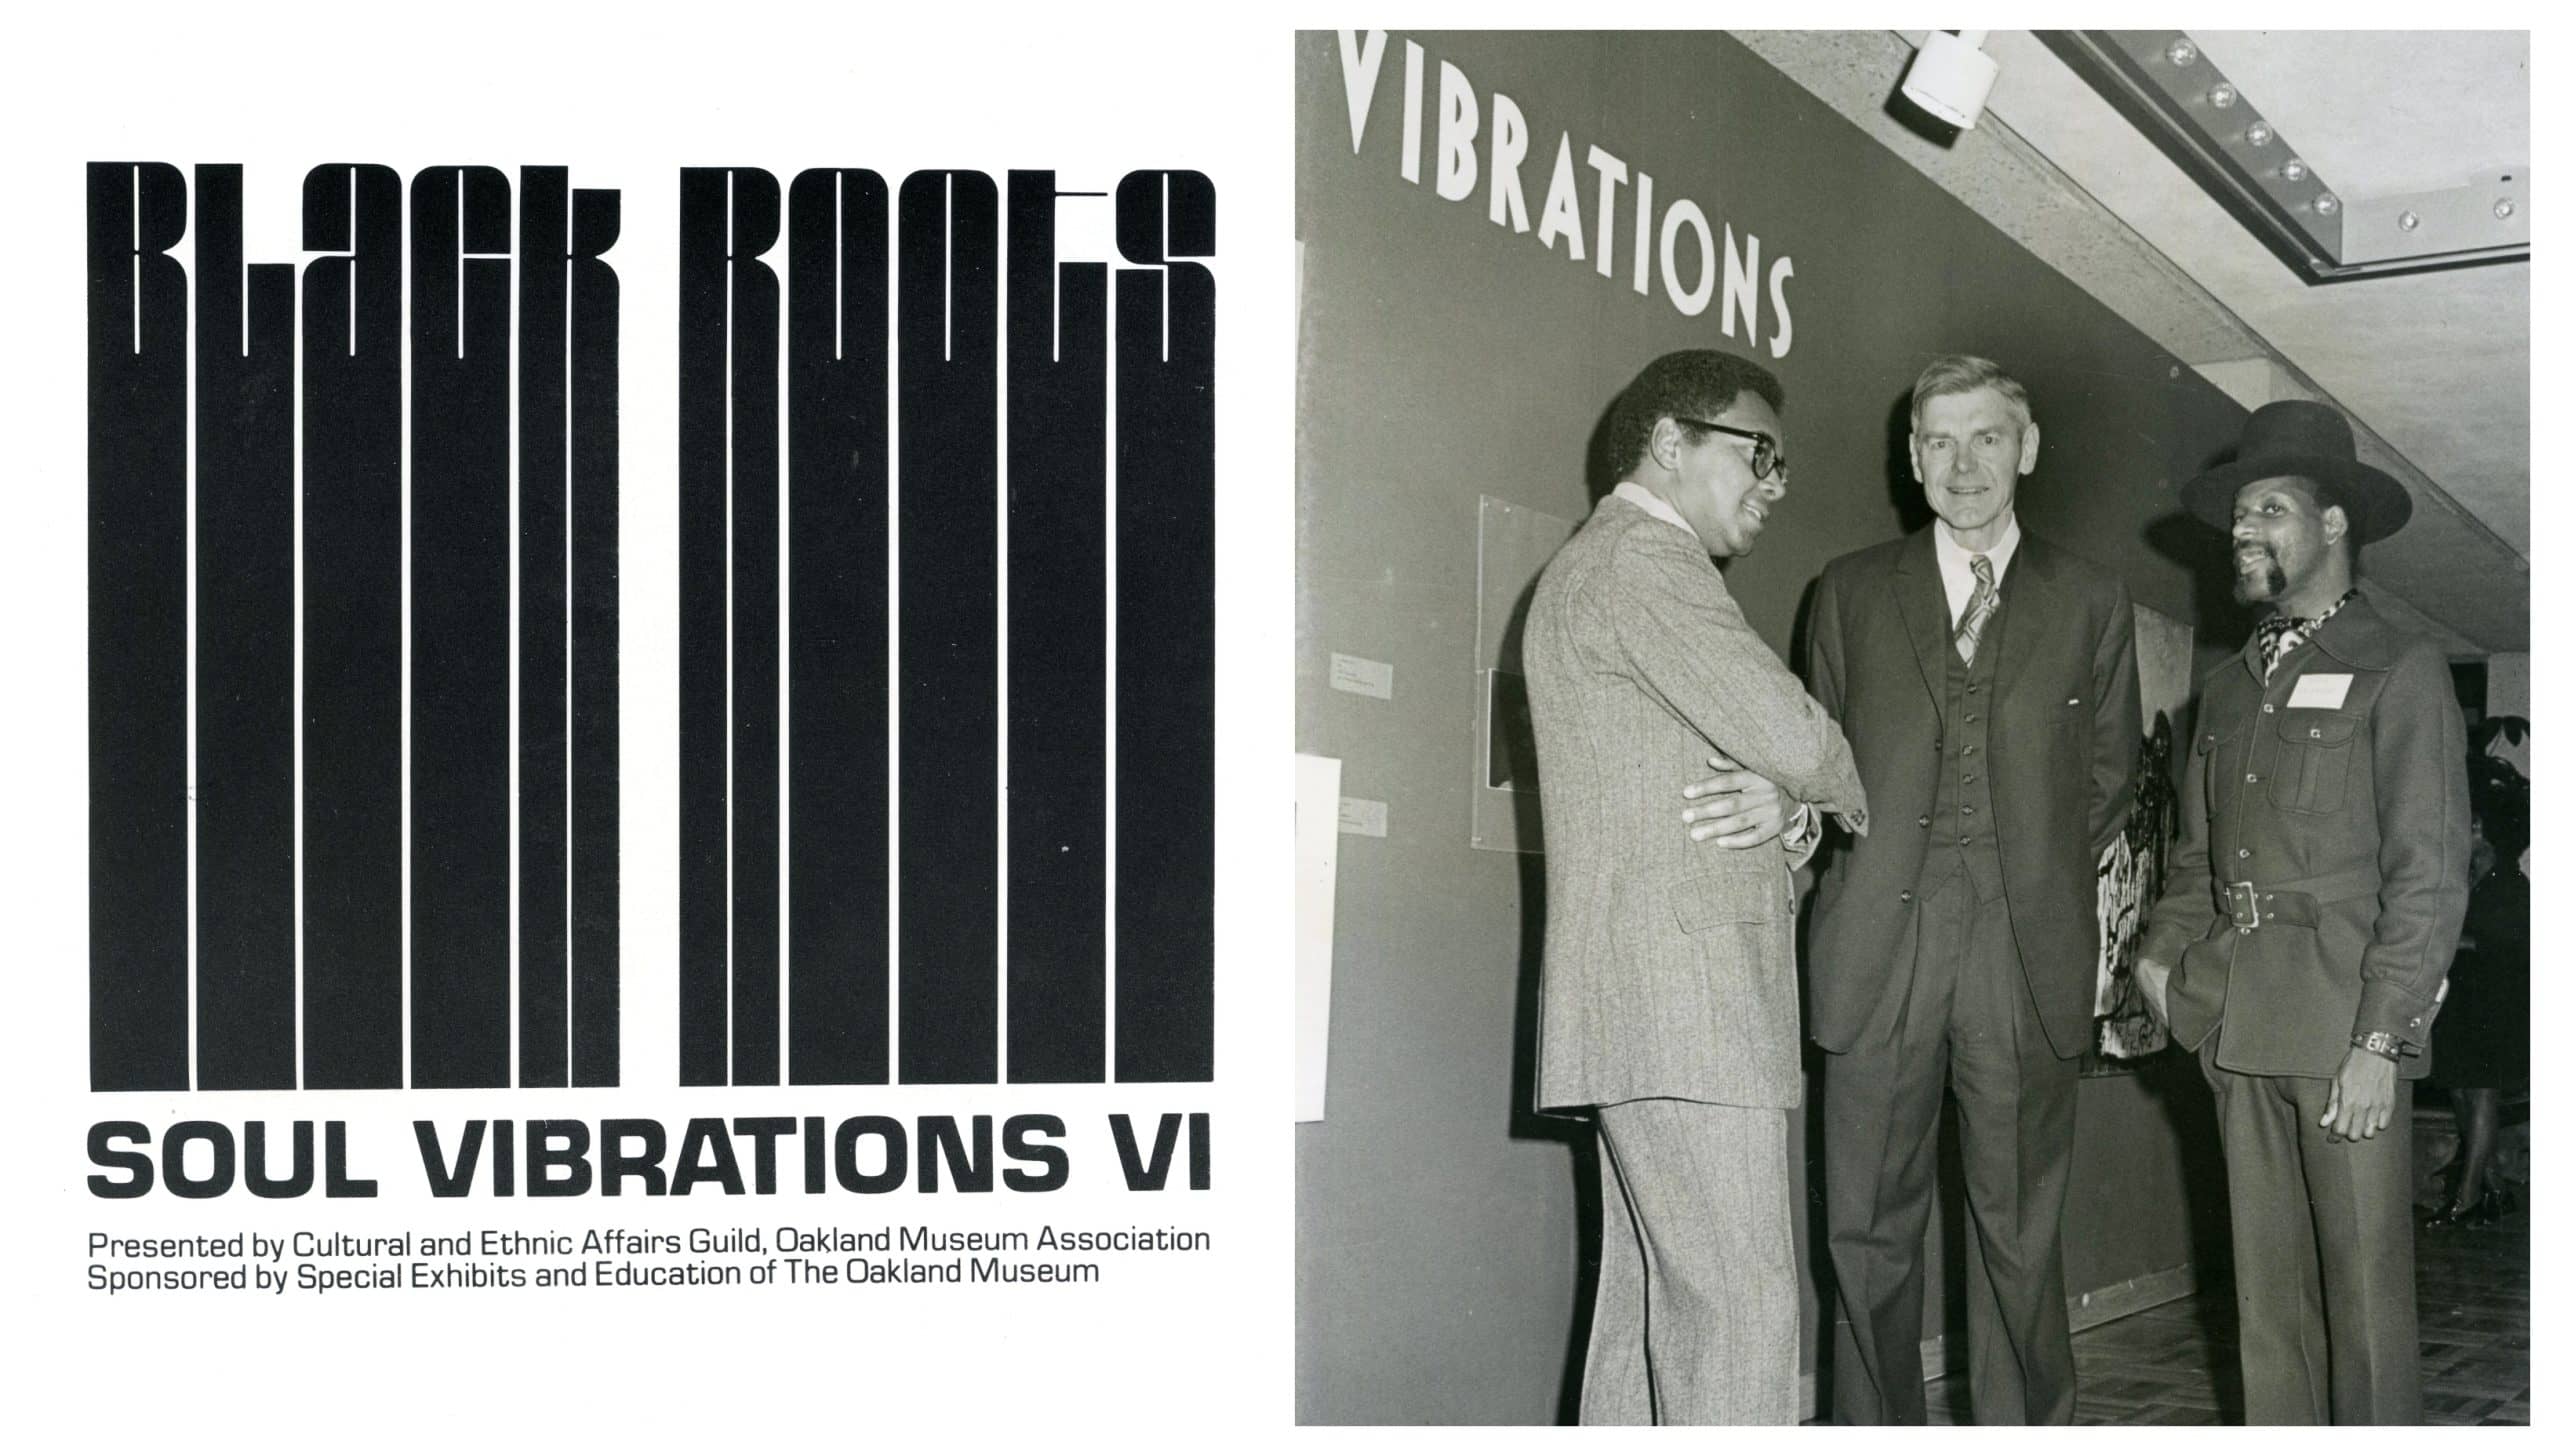 Collage of Soul Vibrations brochure and photograph of Merritt College president Dr. Norvel Smith (left) congratulates Oakland Museum Association president James Moore and curator of special exhibits and education Ben Hazard on Soul Vibrations program